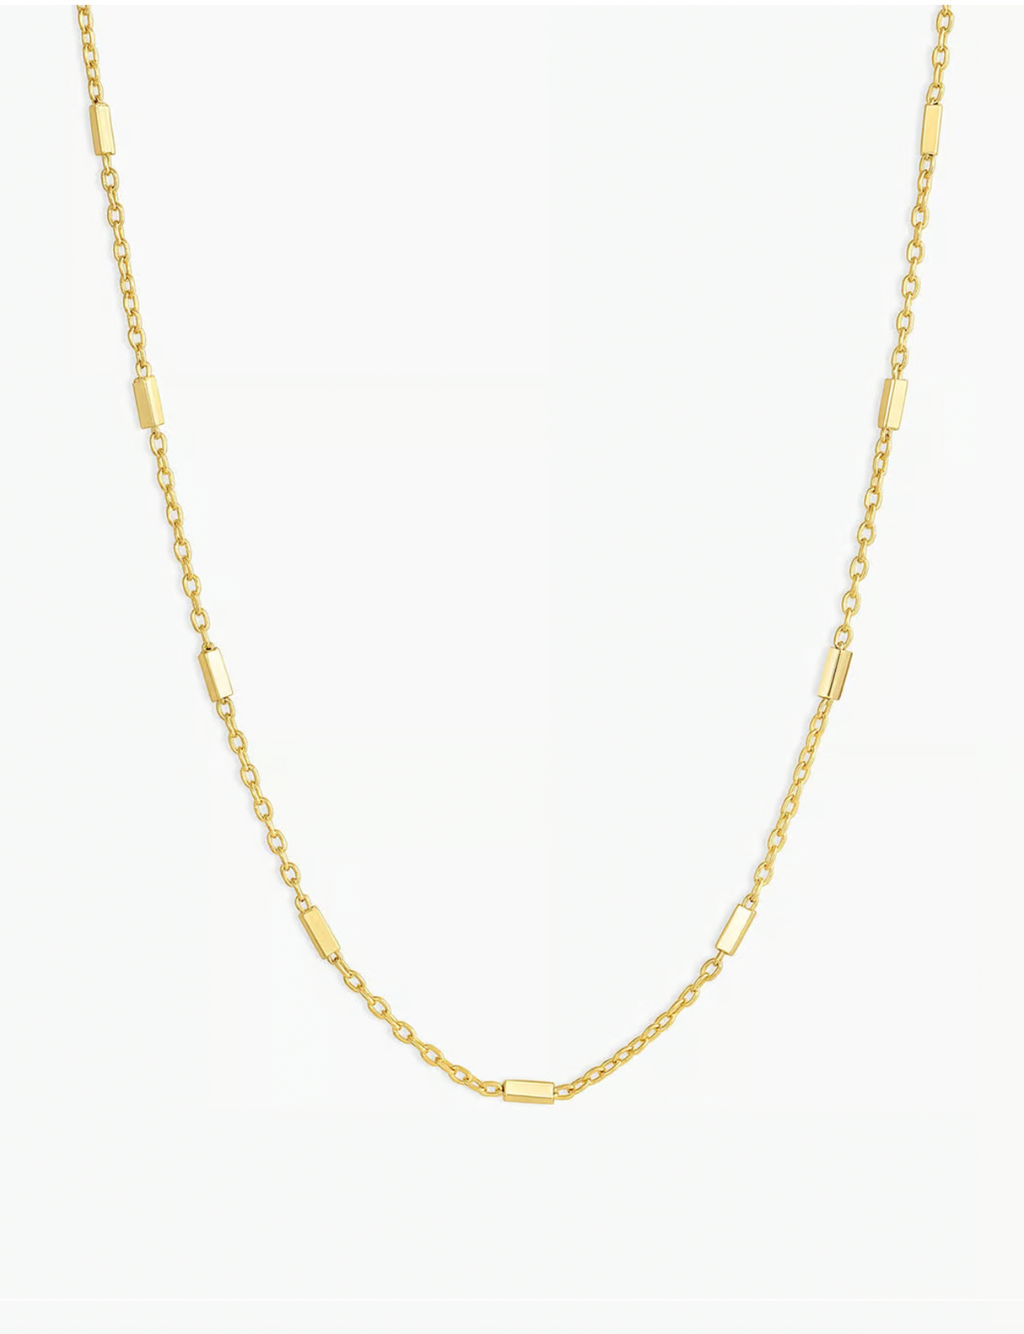 Tatum Necklace, Gold Plated